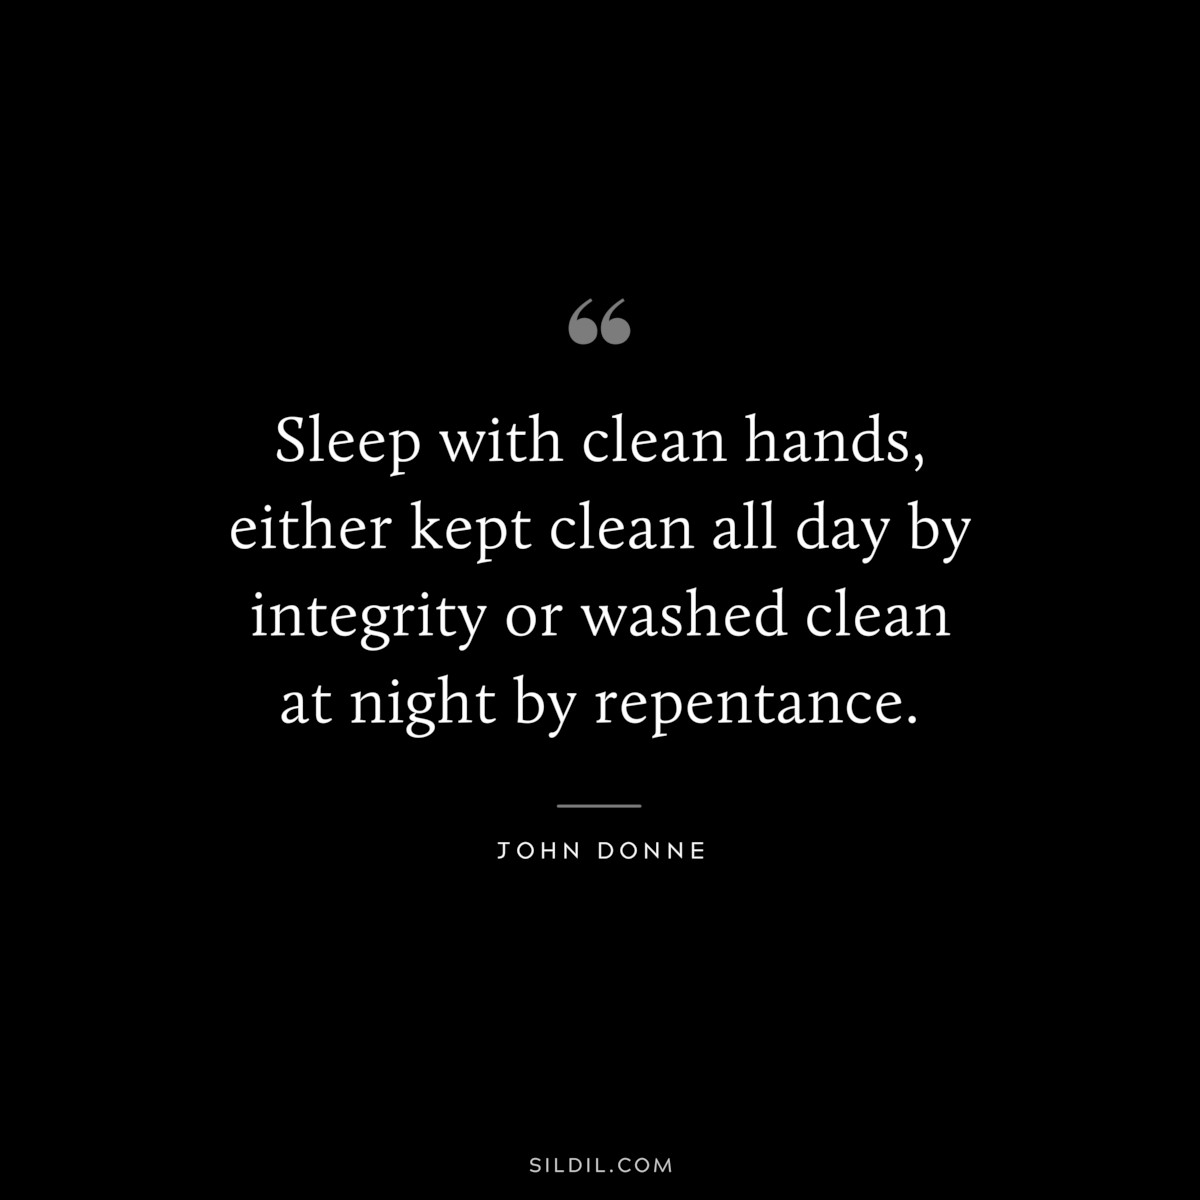 Sleep with clean hands, either kept clean all day by integrity or washed clean at night by repentance. ― John Donne